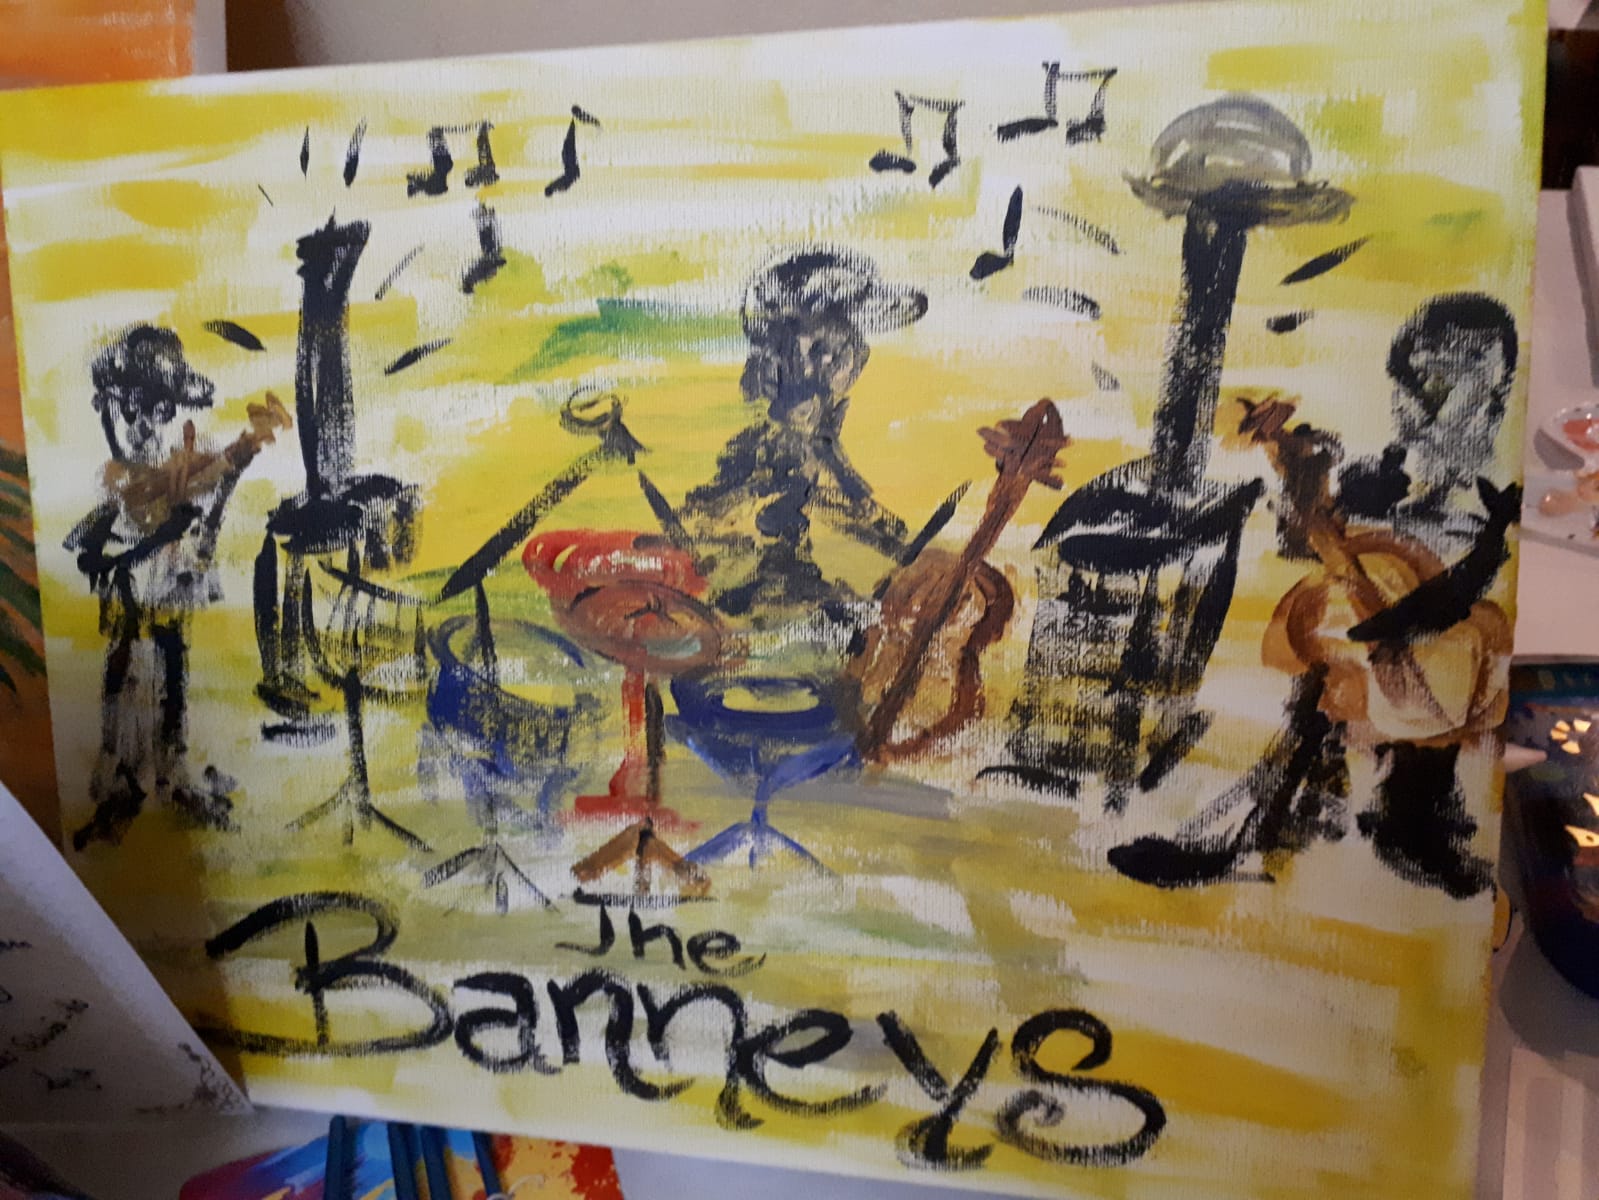 The Banneys in concert